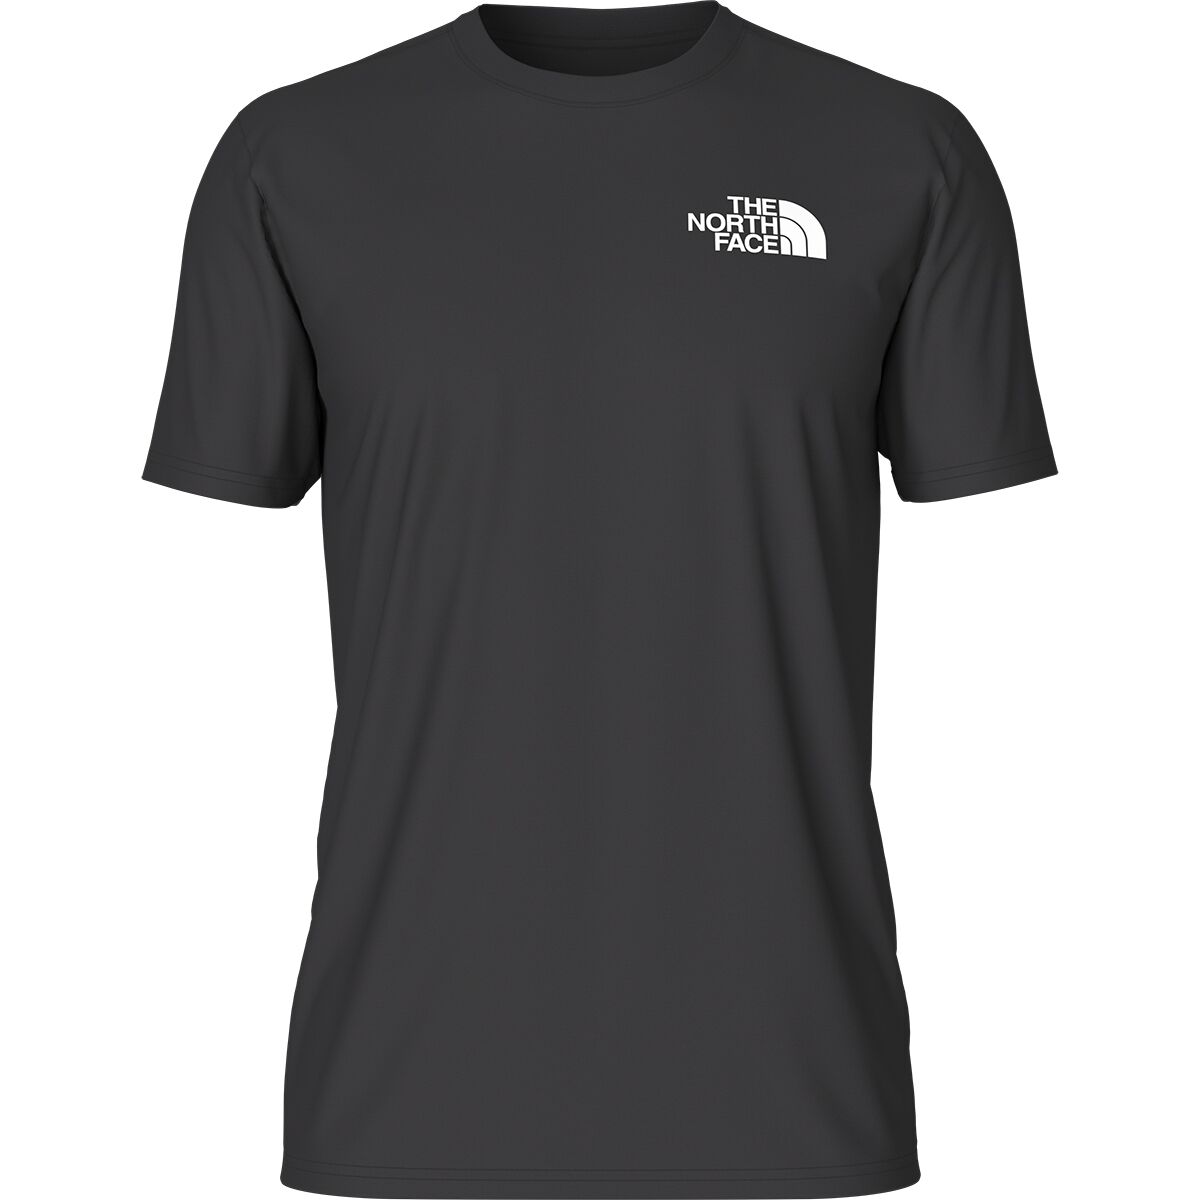 The North Face Throwback Short-Sleeve T-Shirt - Men's